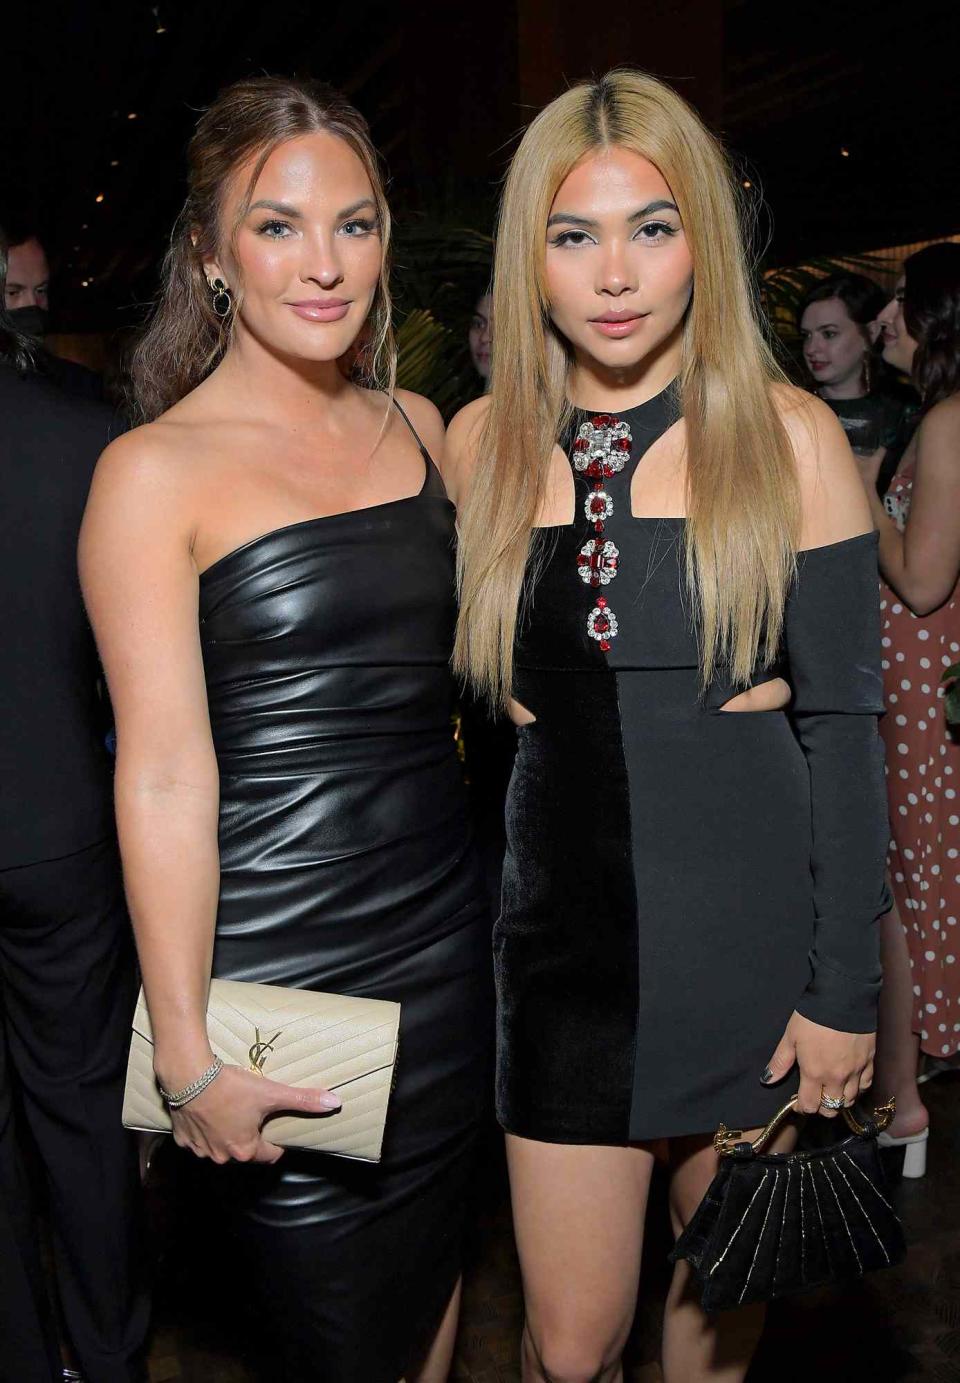 Becca Tilley and Hayley Kiyoko attend "Elle Hollywood Rising" presented by Polo Ralph Lauren and Hulu on May 18, 2022 in Los Angeles, California